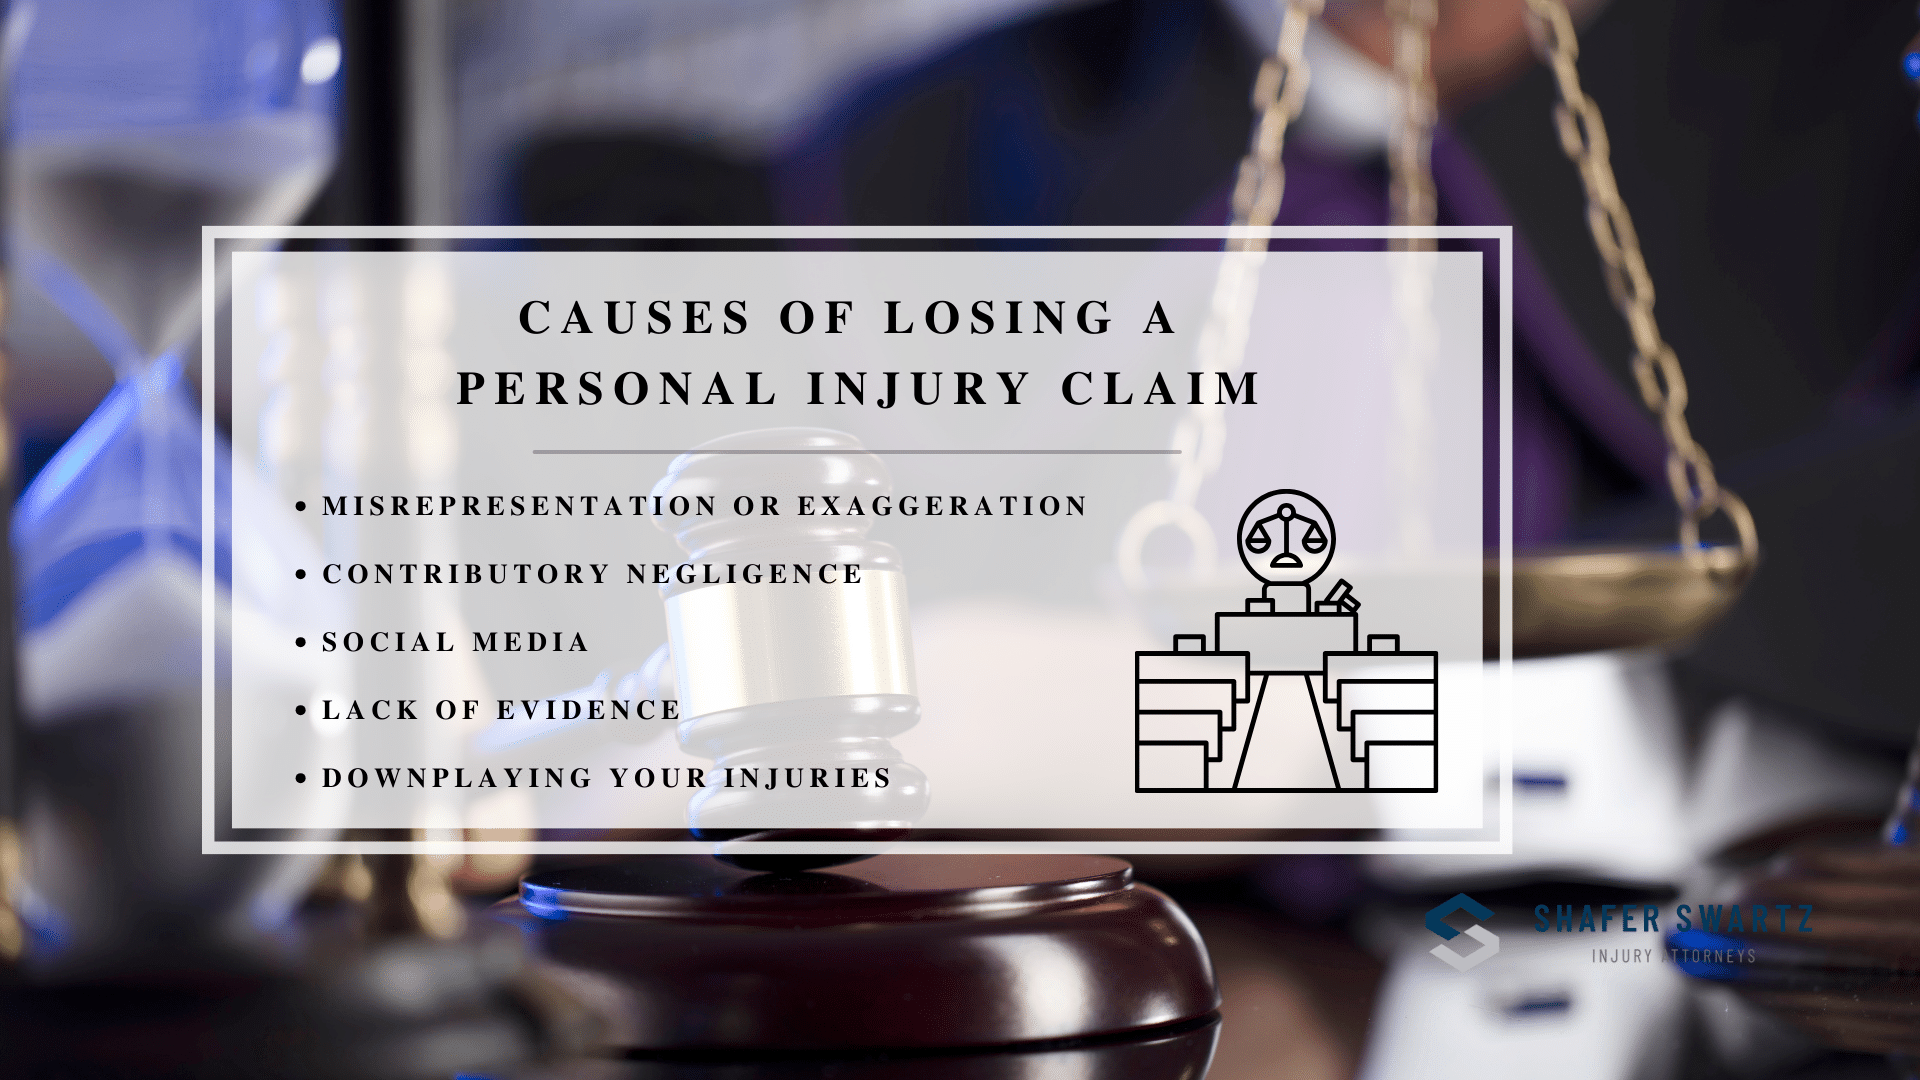 Infographic of the causes of losing a personal injury claim